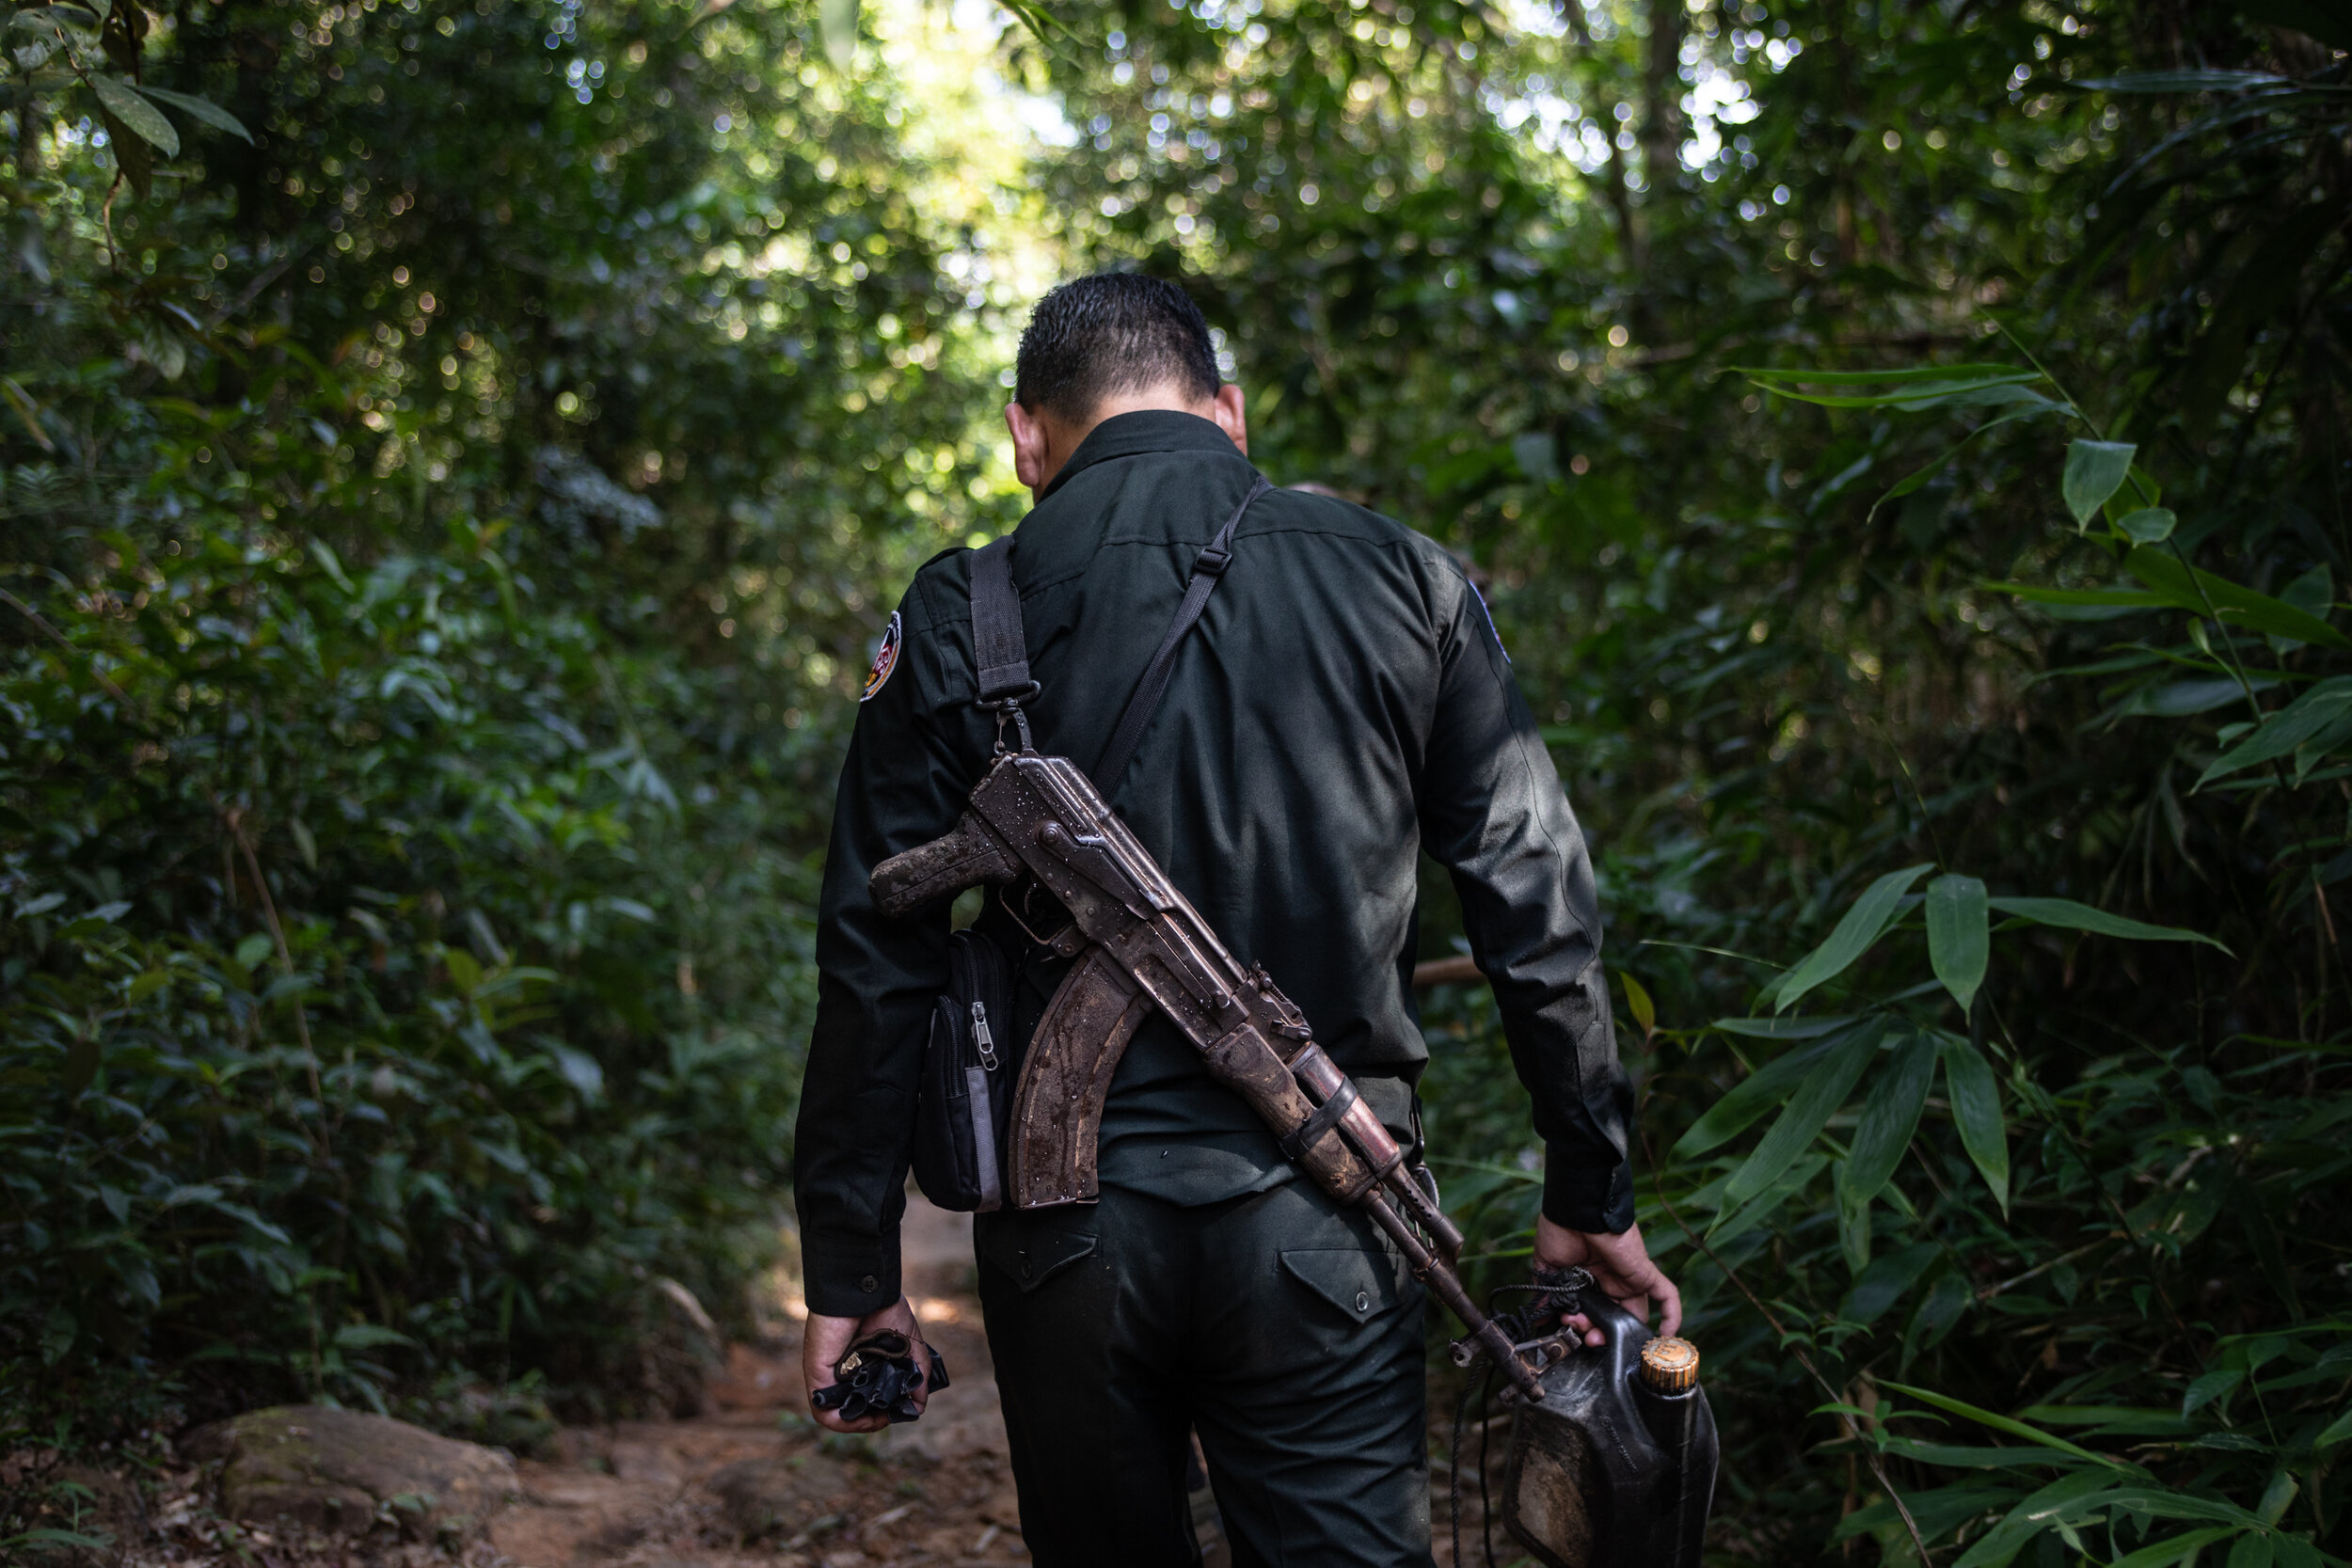  Pan Raksmey, 44, heads back to the station after a foot patrol in the Cardamom Forest.   Due to the vast amount of protected area to patrol and lack of resources, Wildlife Alliance rangers spend three weeks out of every month in the field, leaving o